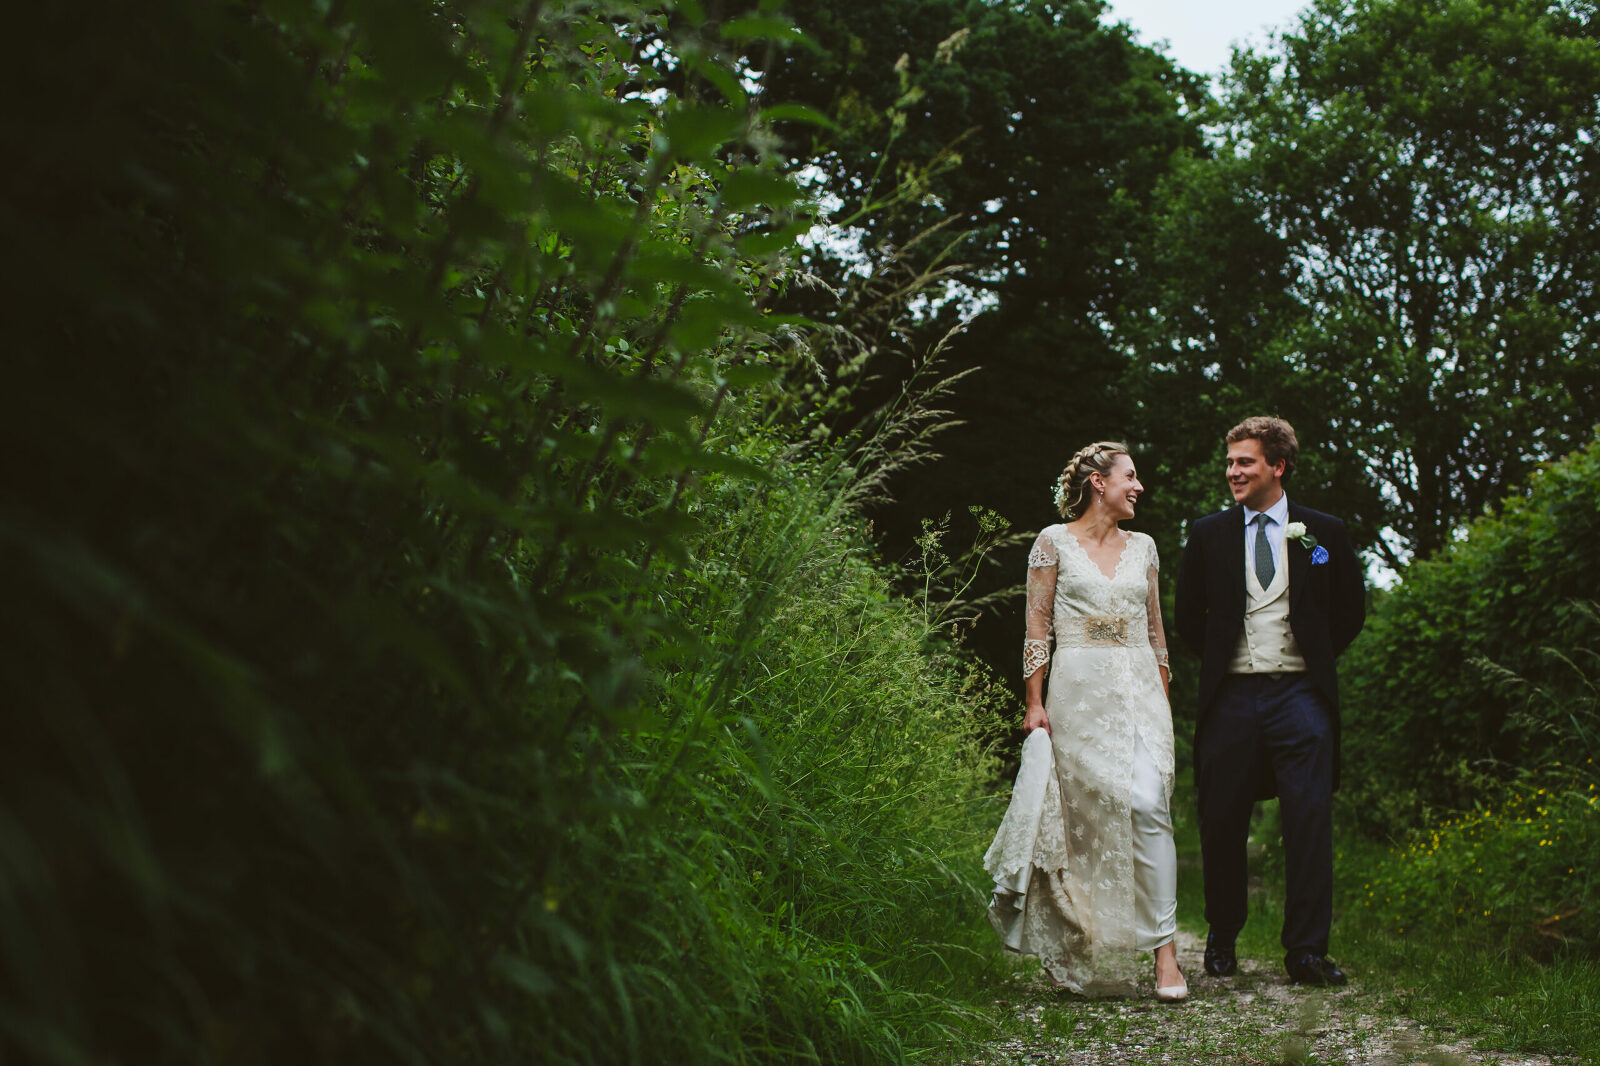 Bride and groom walking country lane